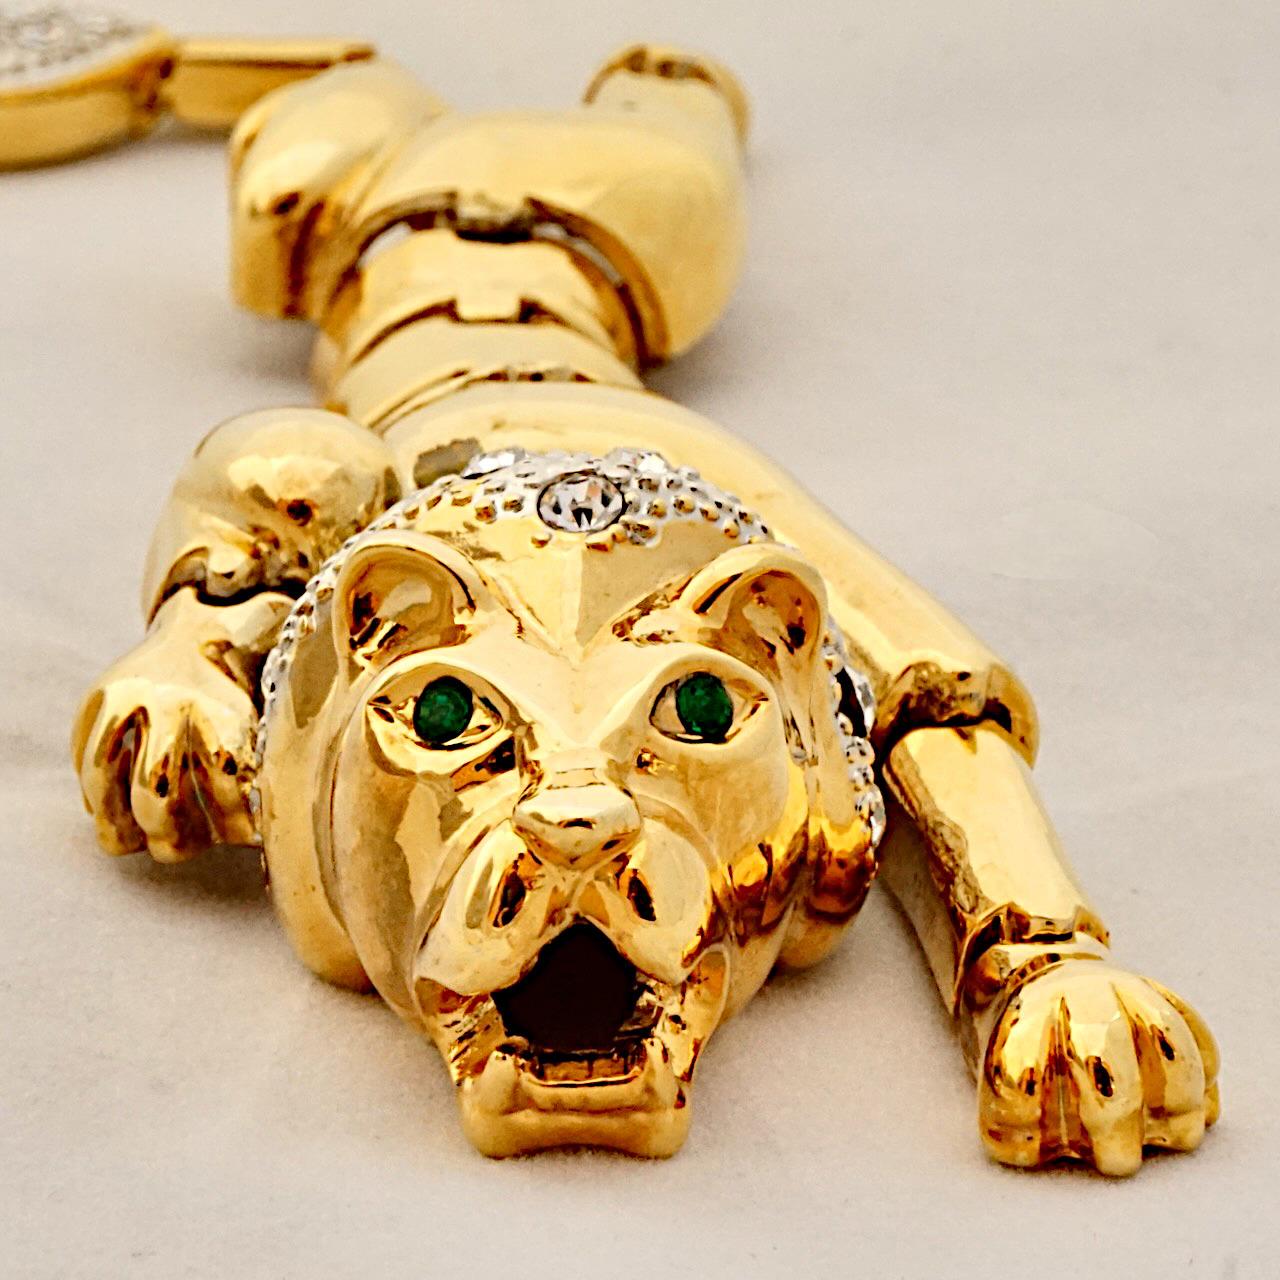 Gold plated articulated lion shoulder brooch, set with clear rhinestones, and two green rhinestones for the eyes. Measuring length 17.6 cm / 6.9 inches. The brooch is in very good condition, with some wear and scratching as expected.

This beautiful